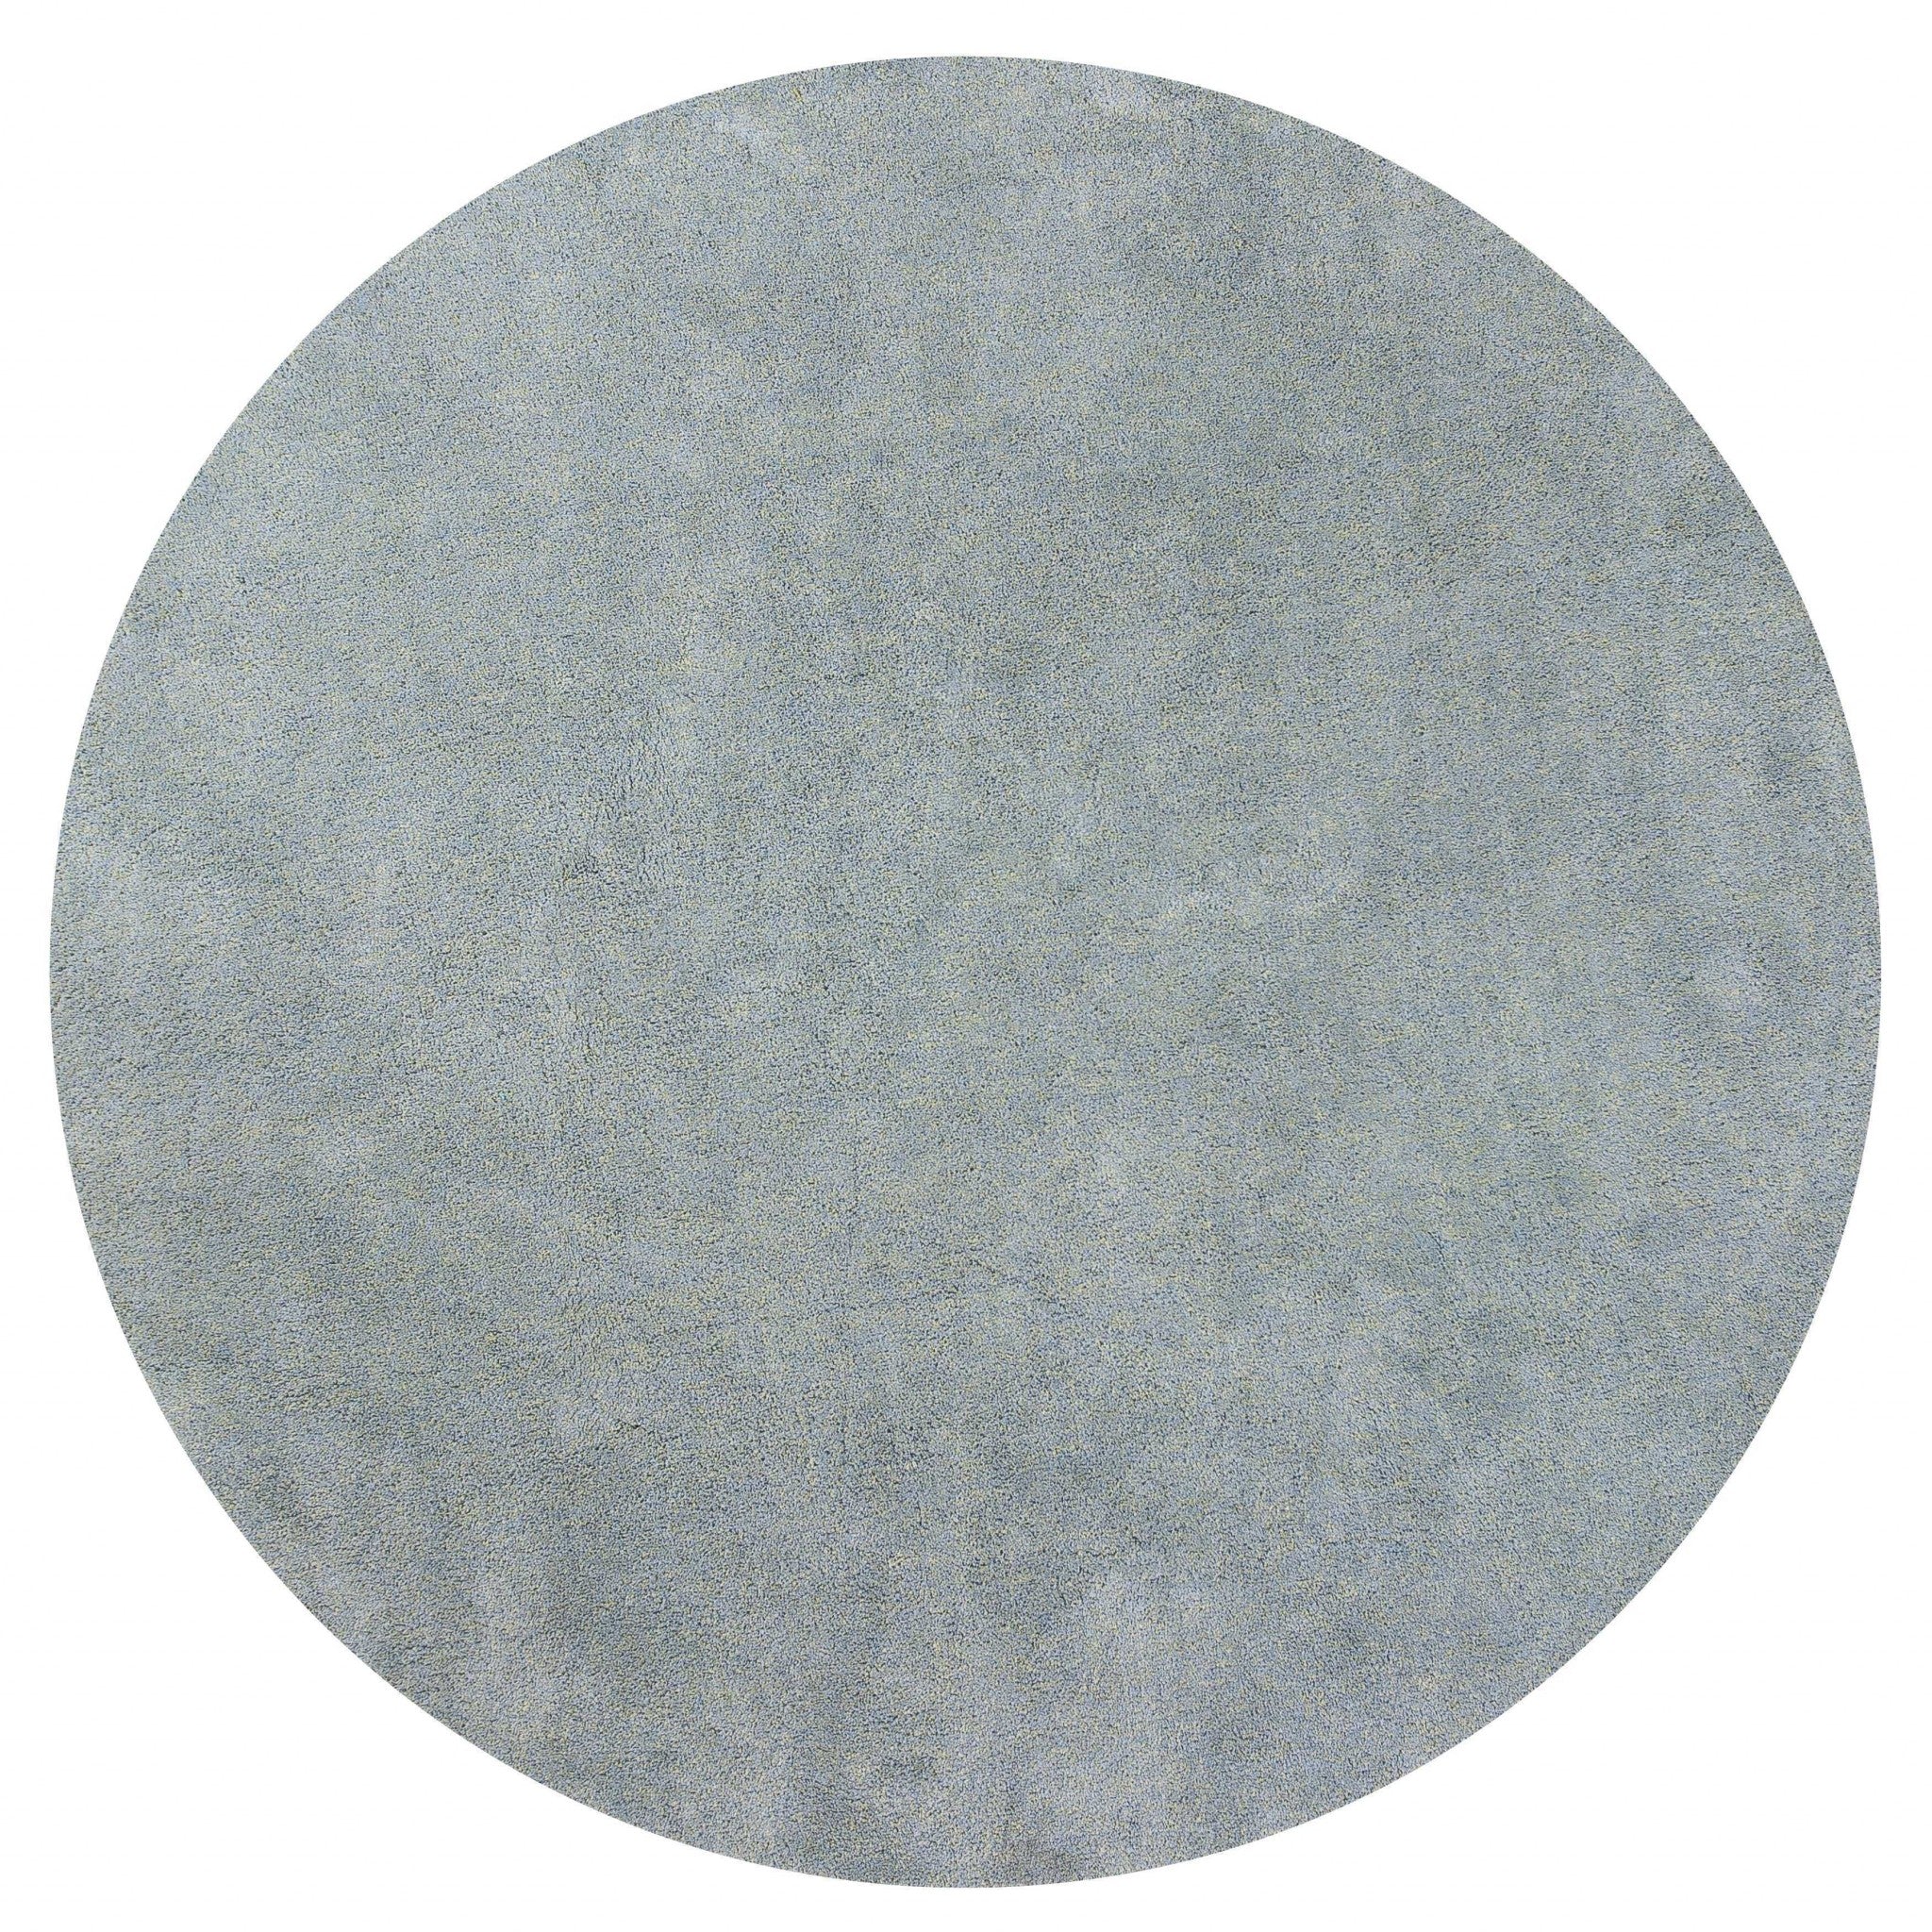 8' Round  Polyester Blue Heather Area Rug